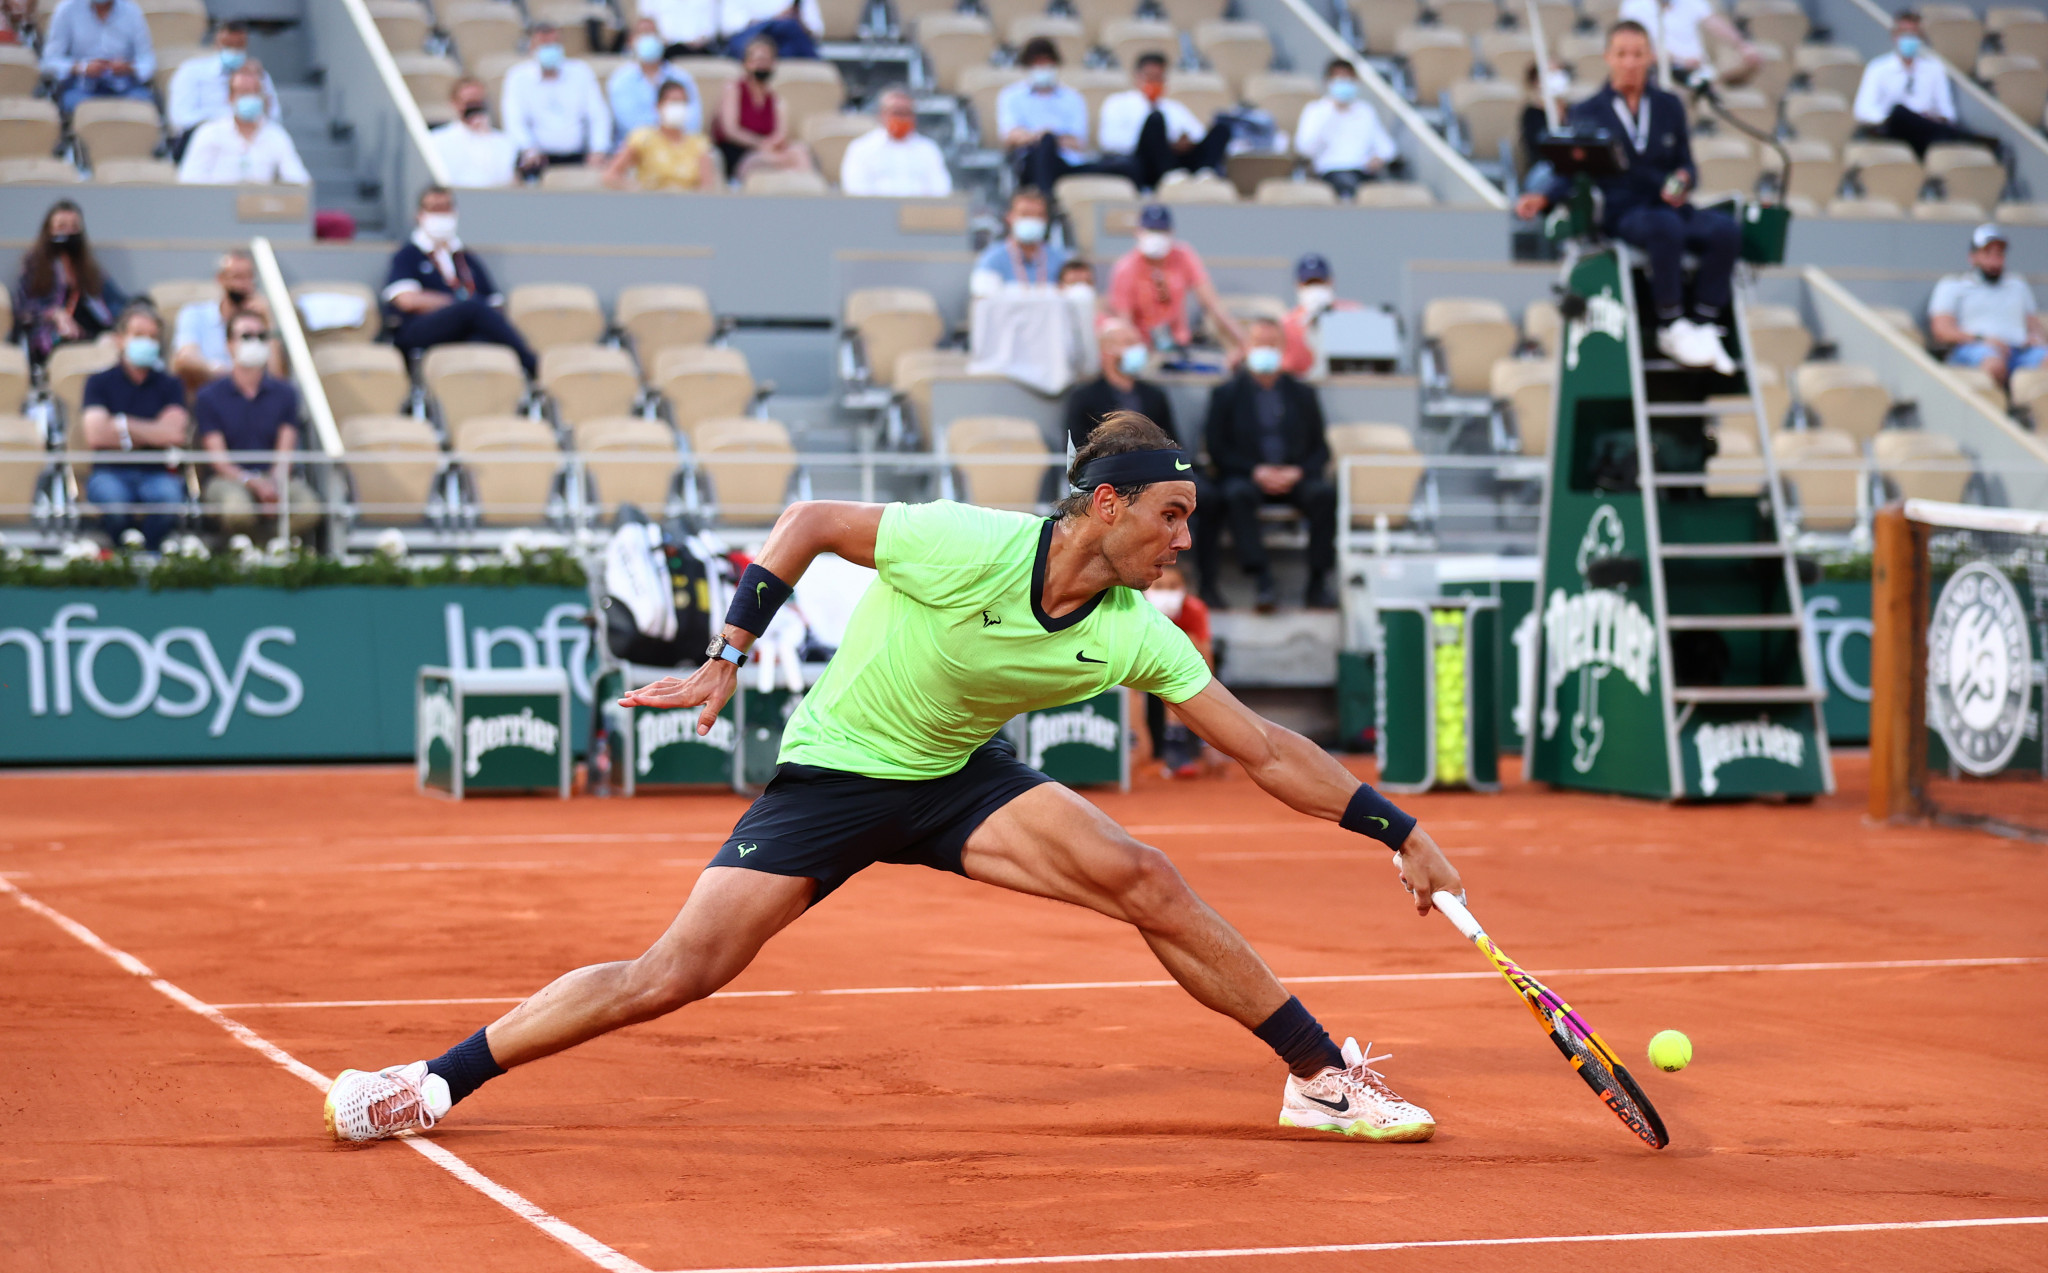 Nadal suffers third loss at French Open in 108 matches on dramatic men's semi-final day